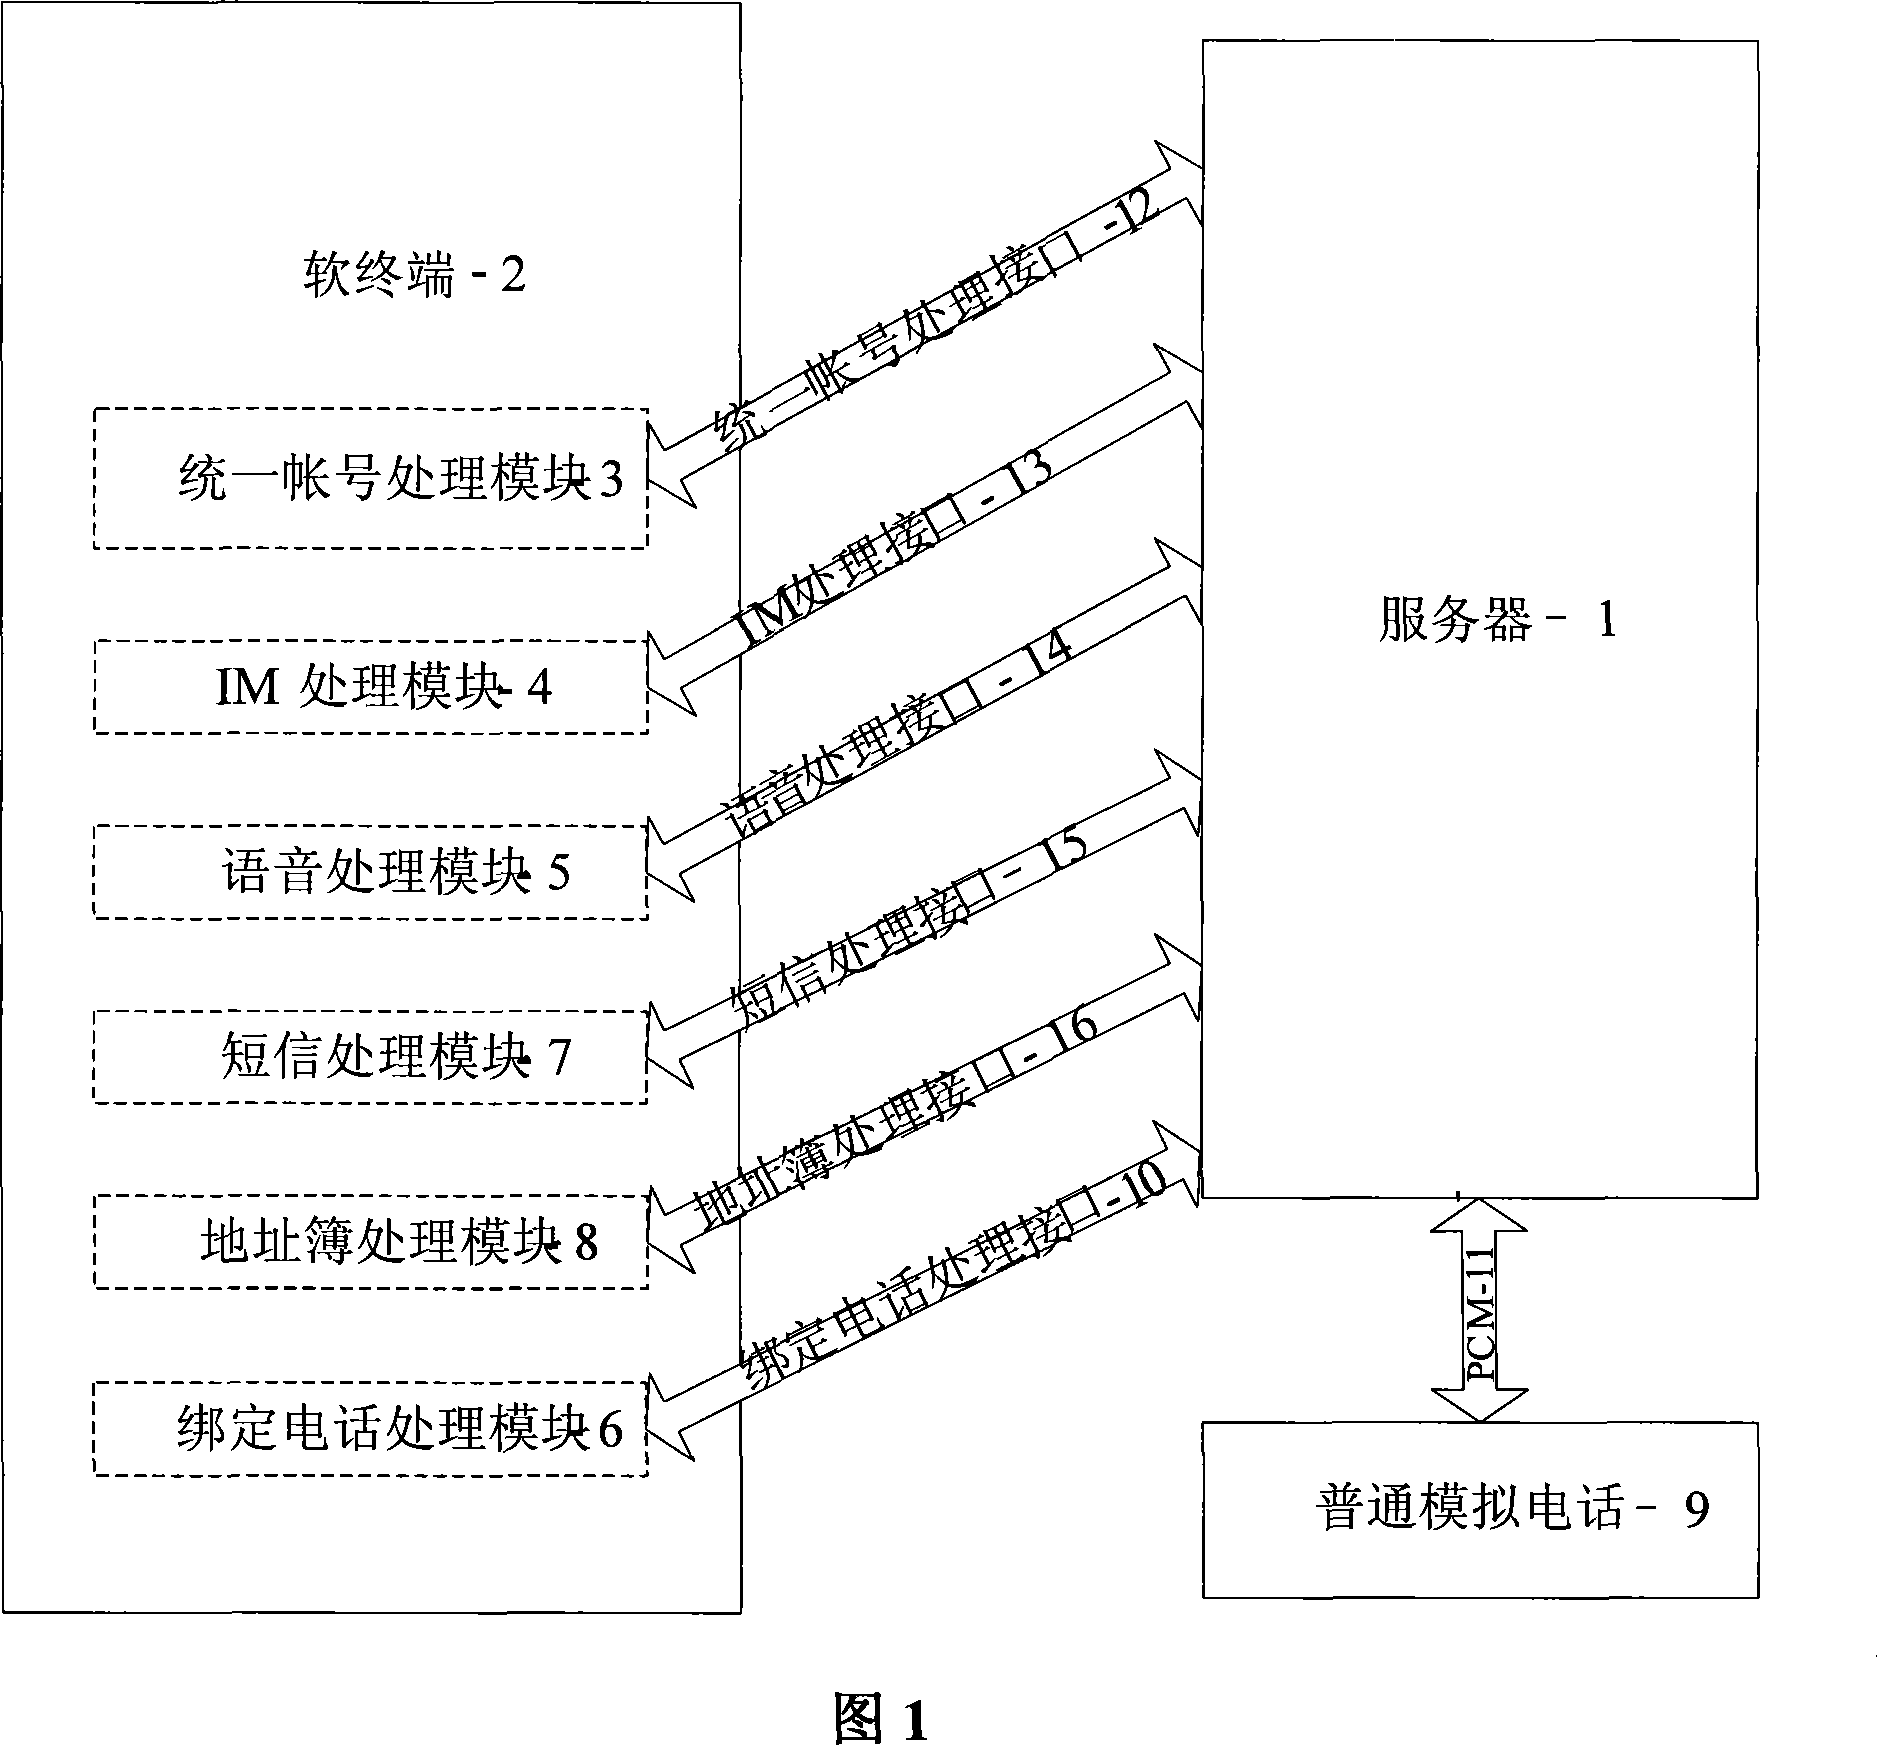 System for simulating telephone and soft terminal bind to realize anastomosing communication